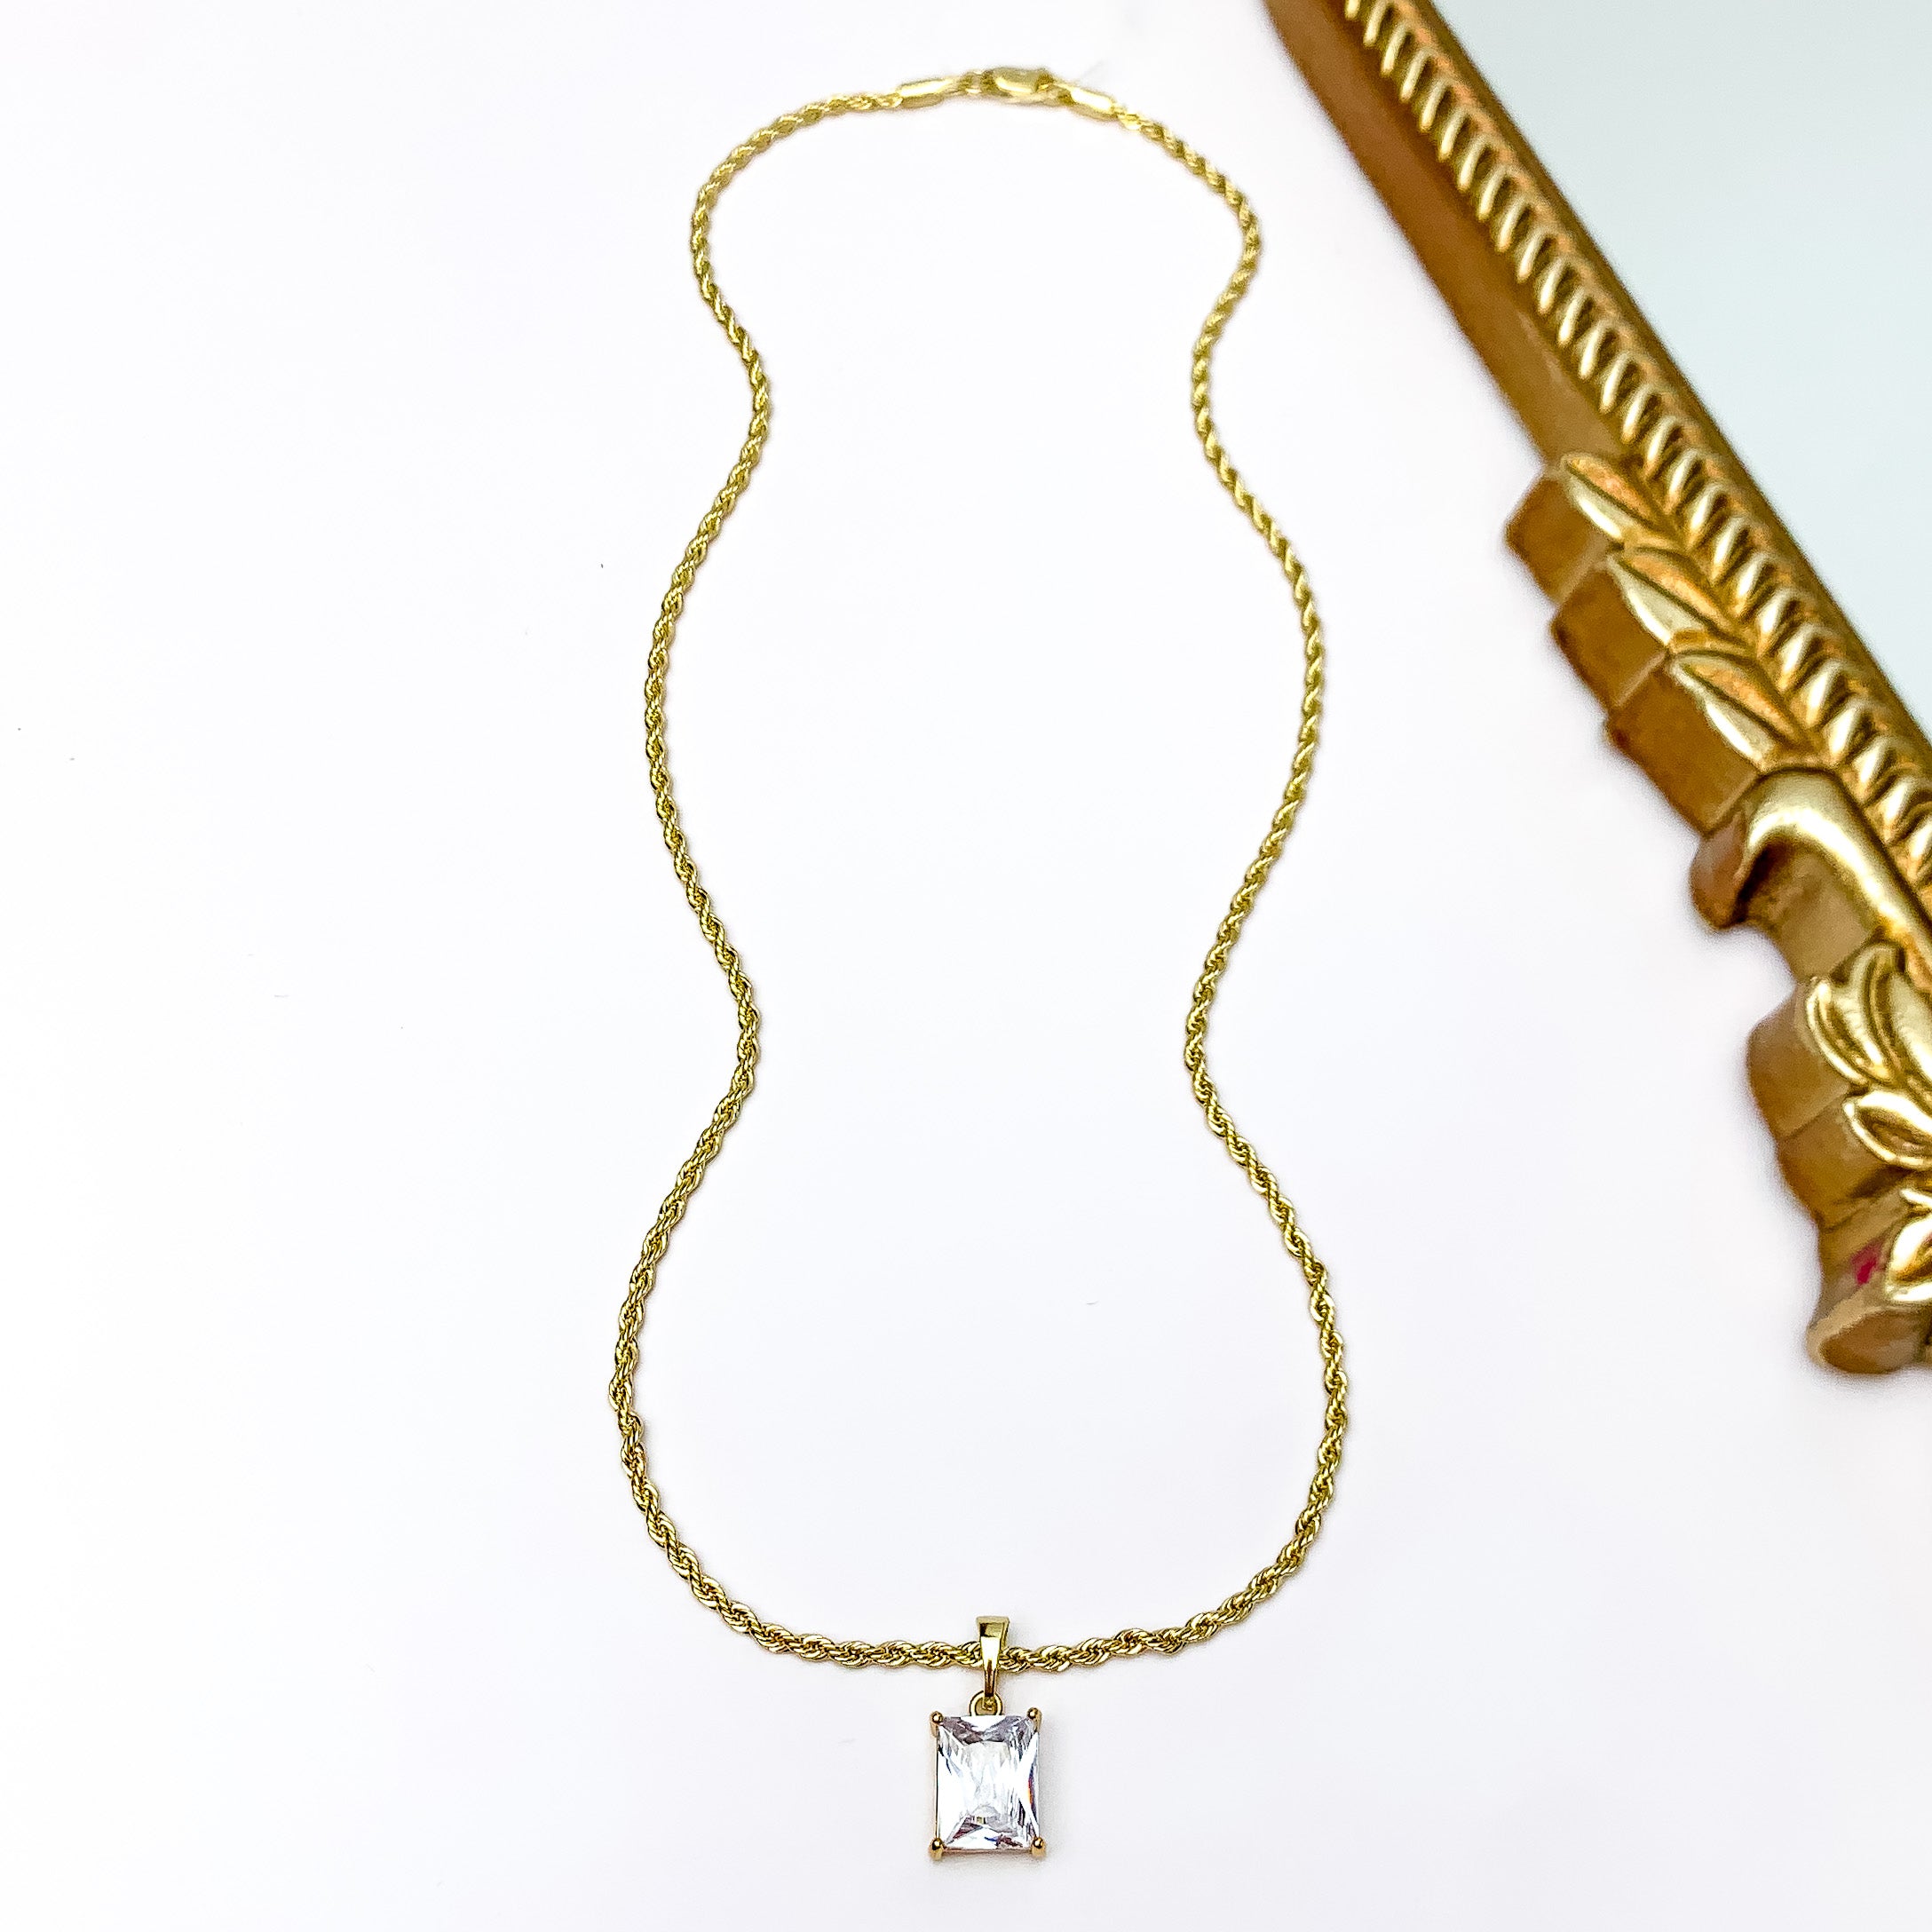 Pictured is a gold rope chain neckalce with a rectabgle, clear crystal pendant. This necklace is pictured on a white background with a gold mirror in the top right corner.  